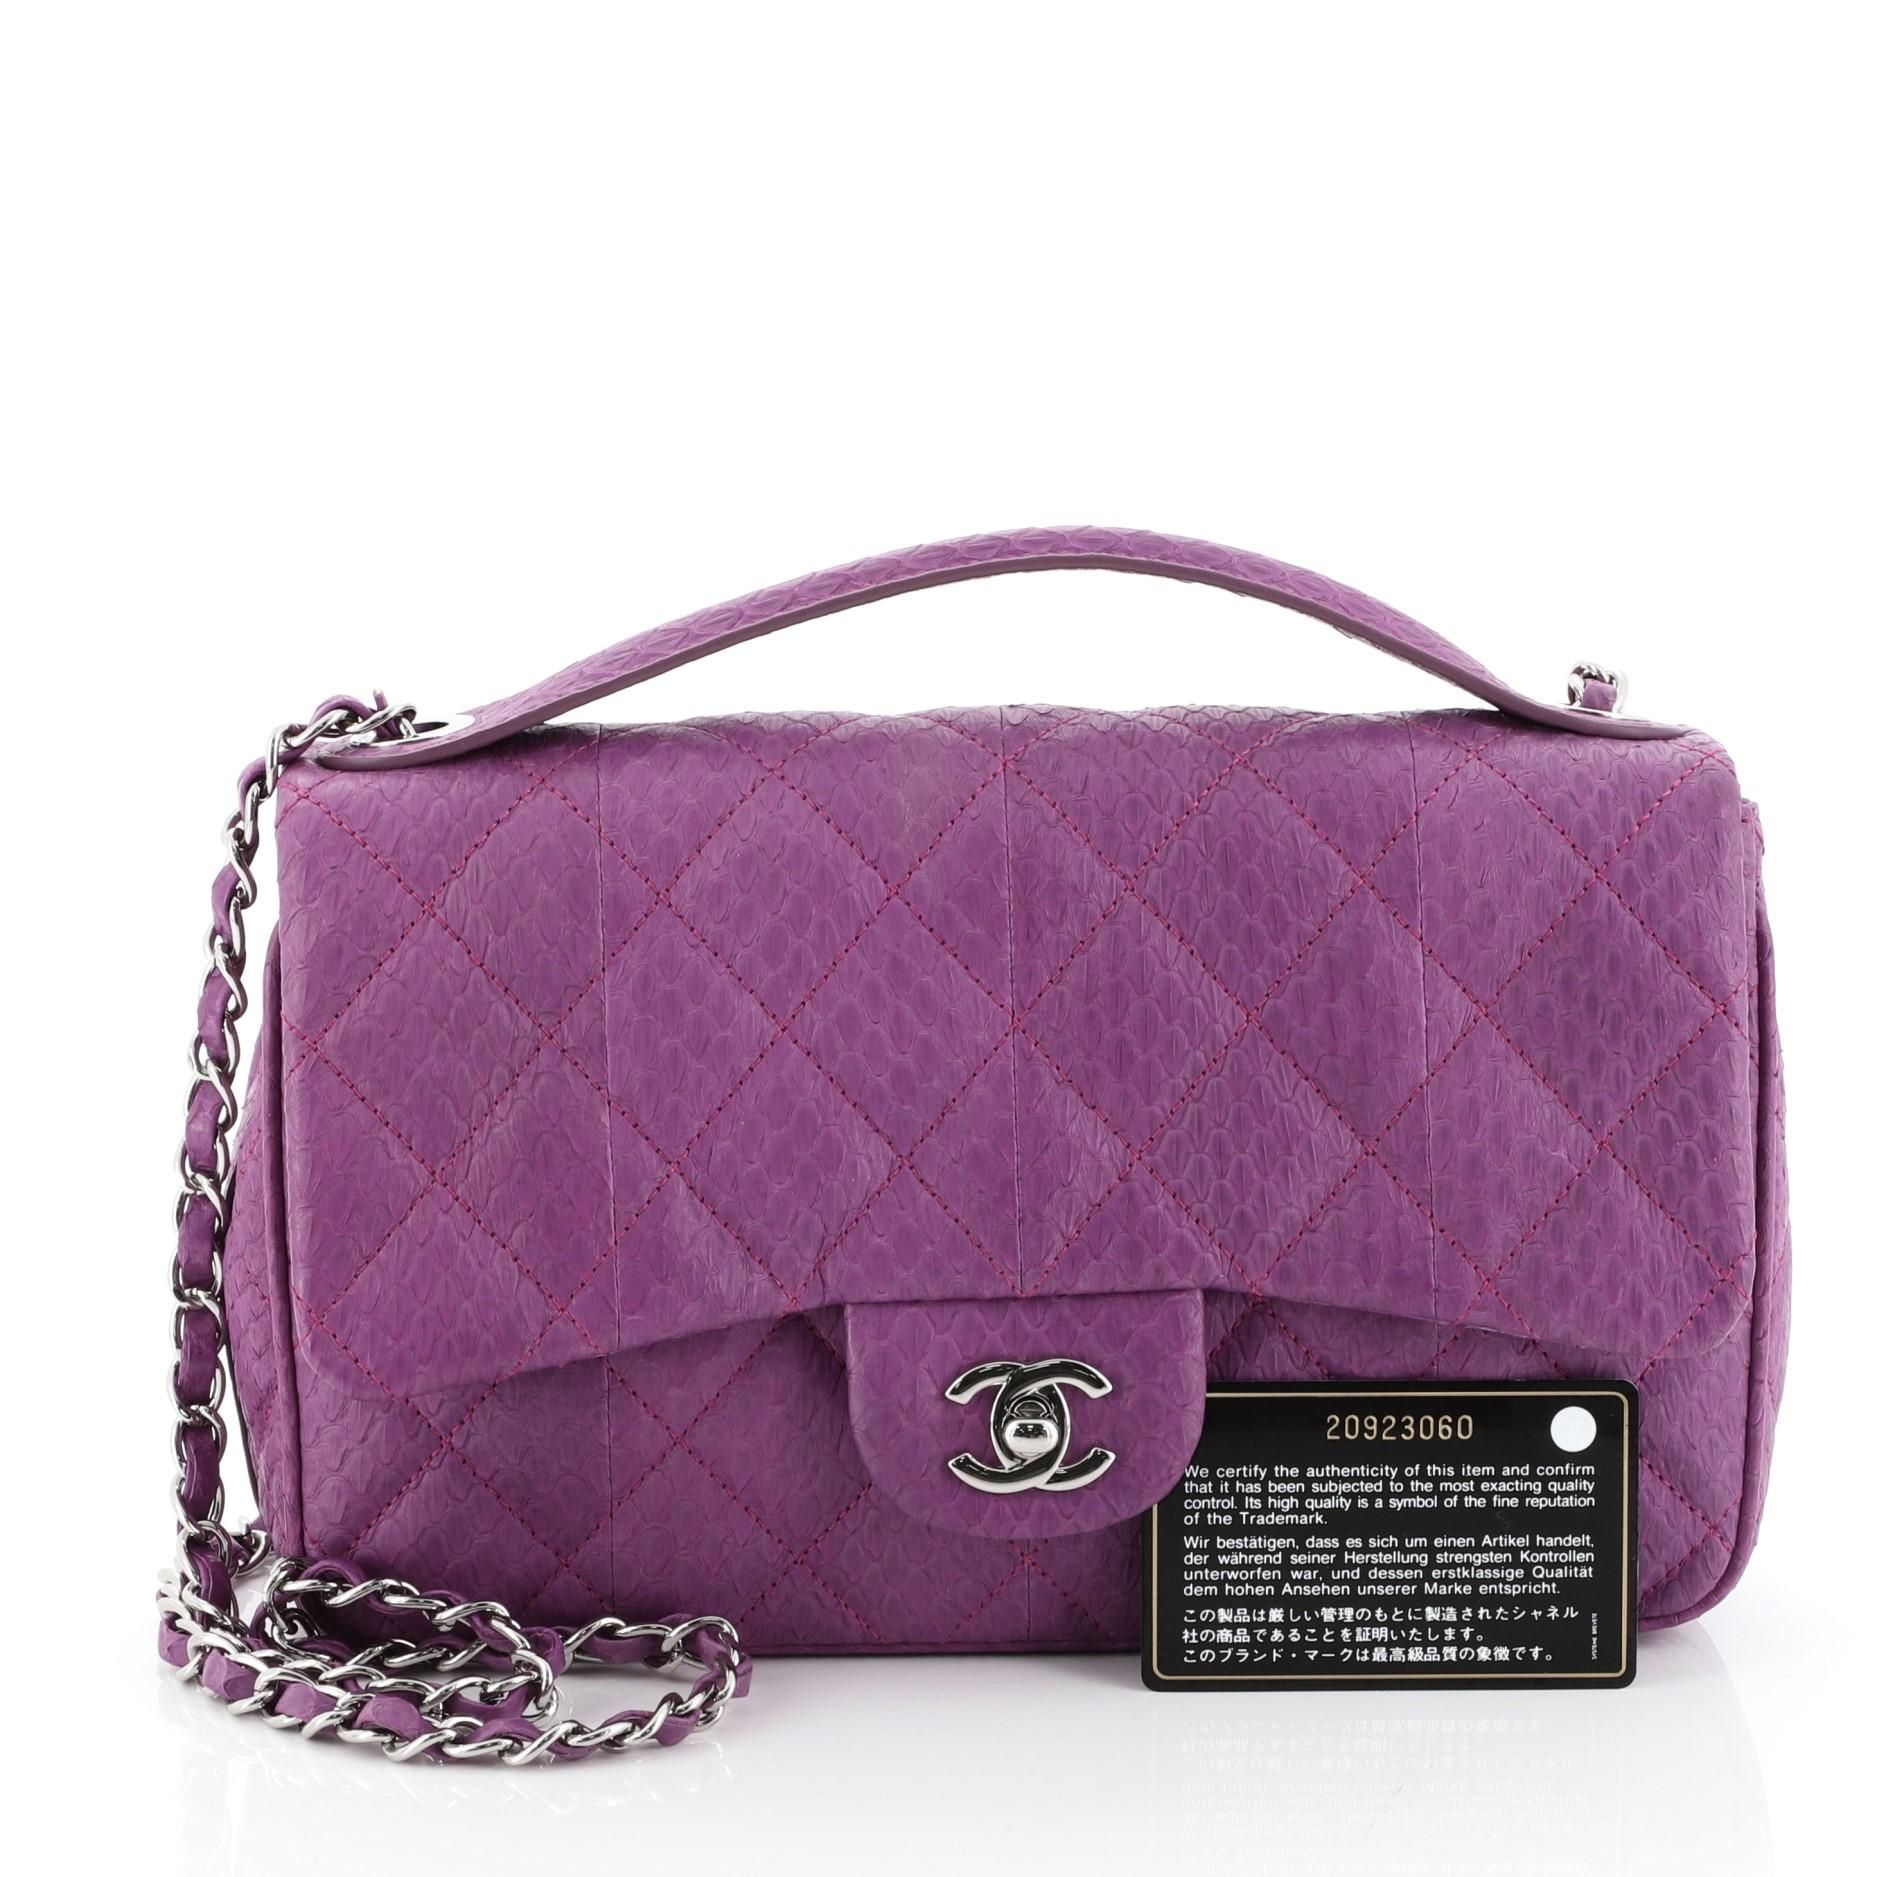 This Chanel Easy Carry Flap Bag Quilted Snakeskin Medium, crafted in purple snakeskin, features a top handle, woven-in leather chain strap, exterior back slip pocket and silver-tone hardware. Its turn-lock closure opens to a purple satin interior.